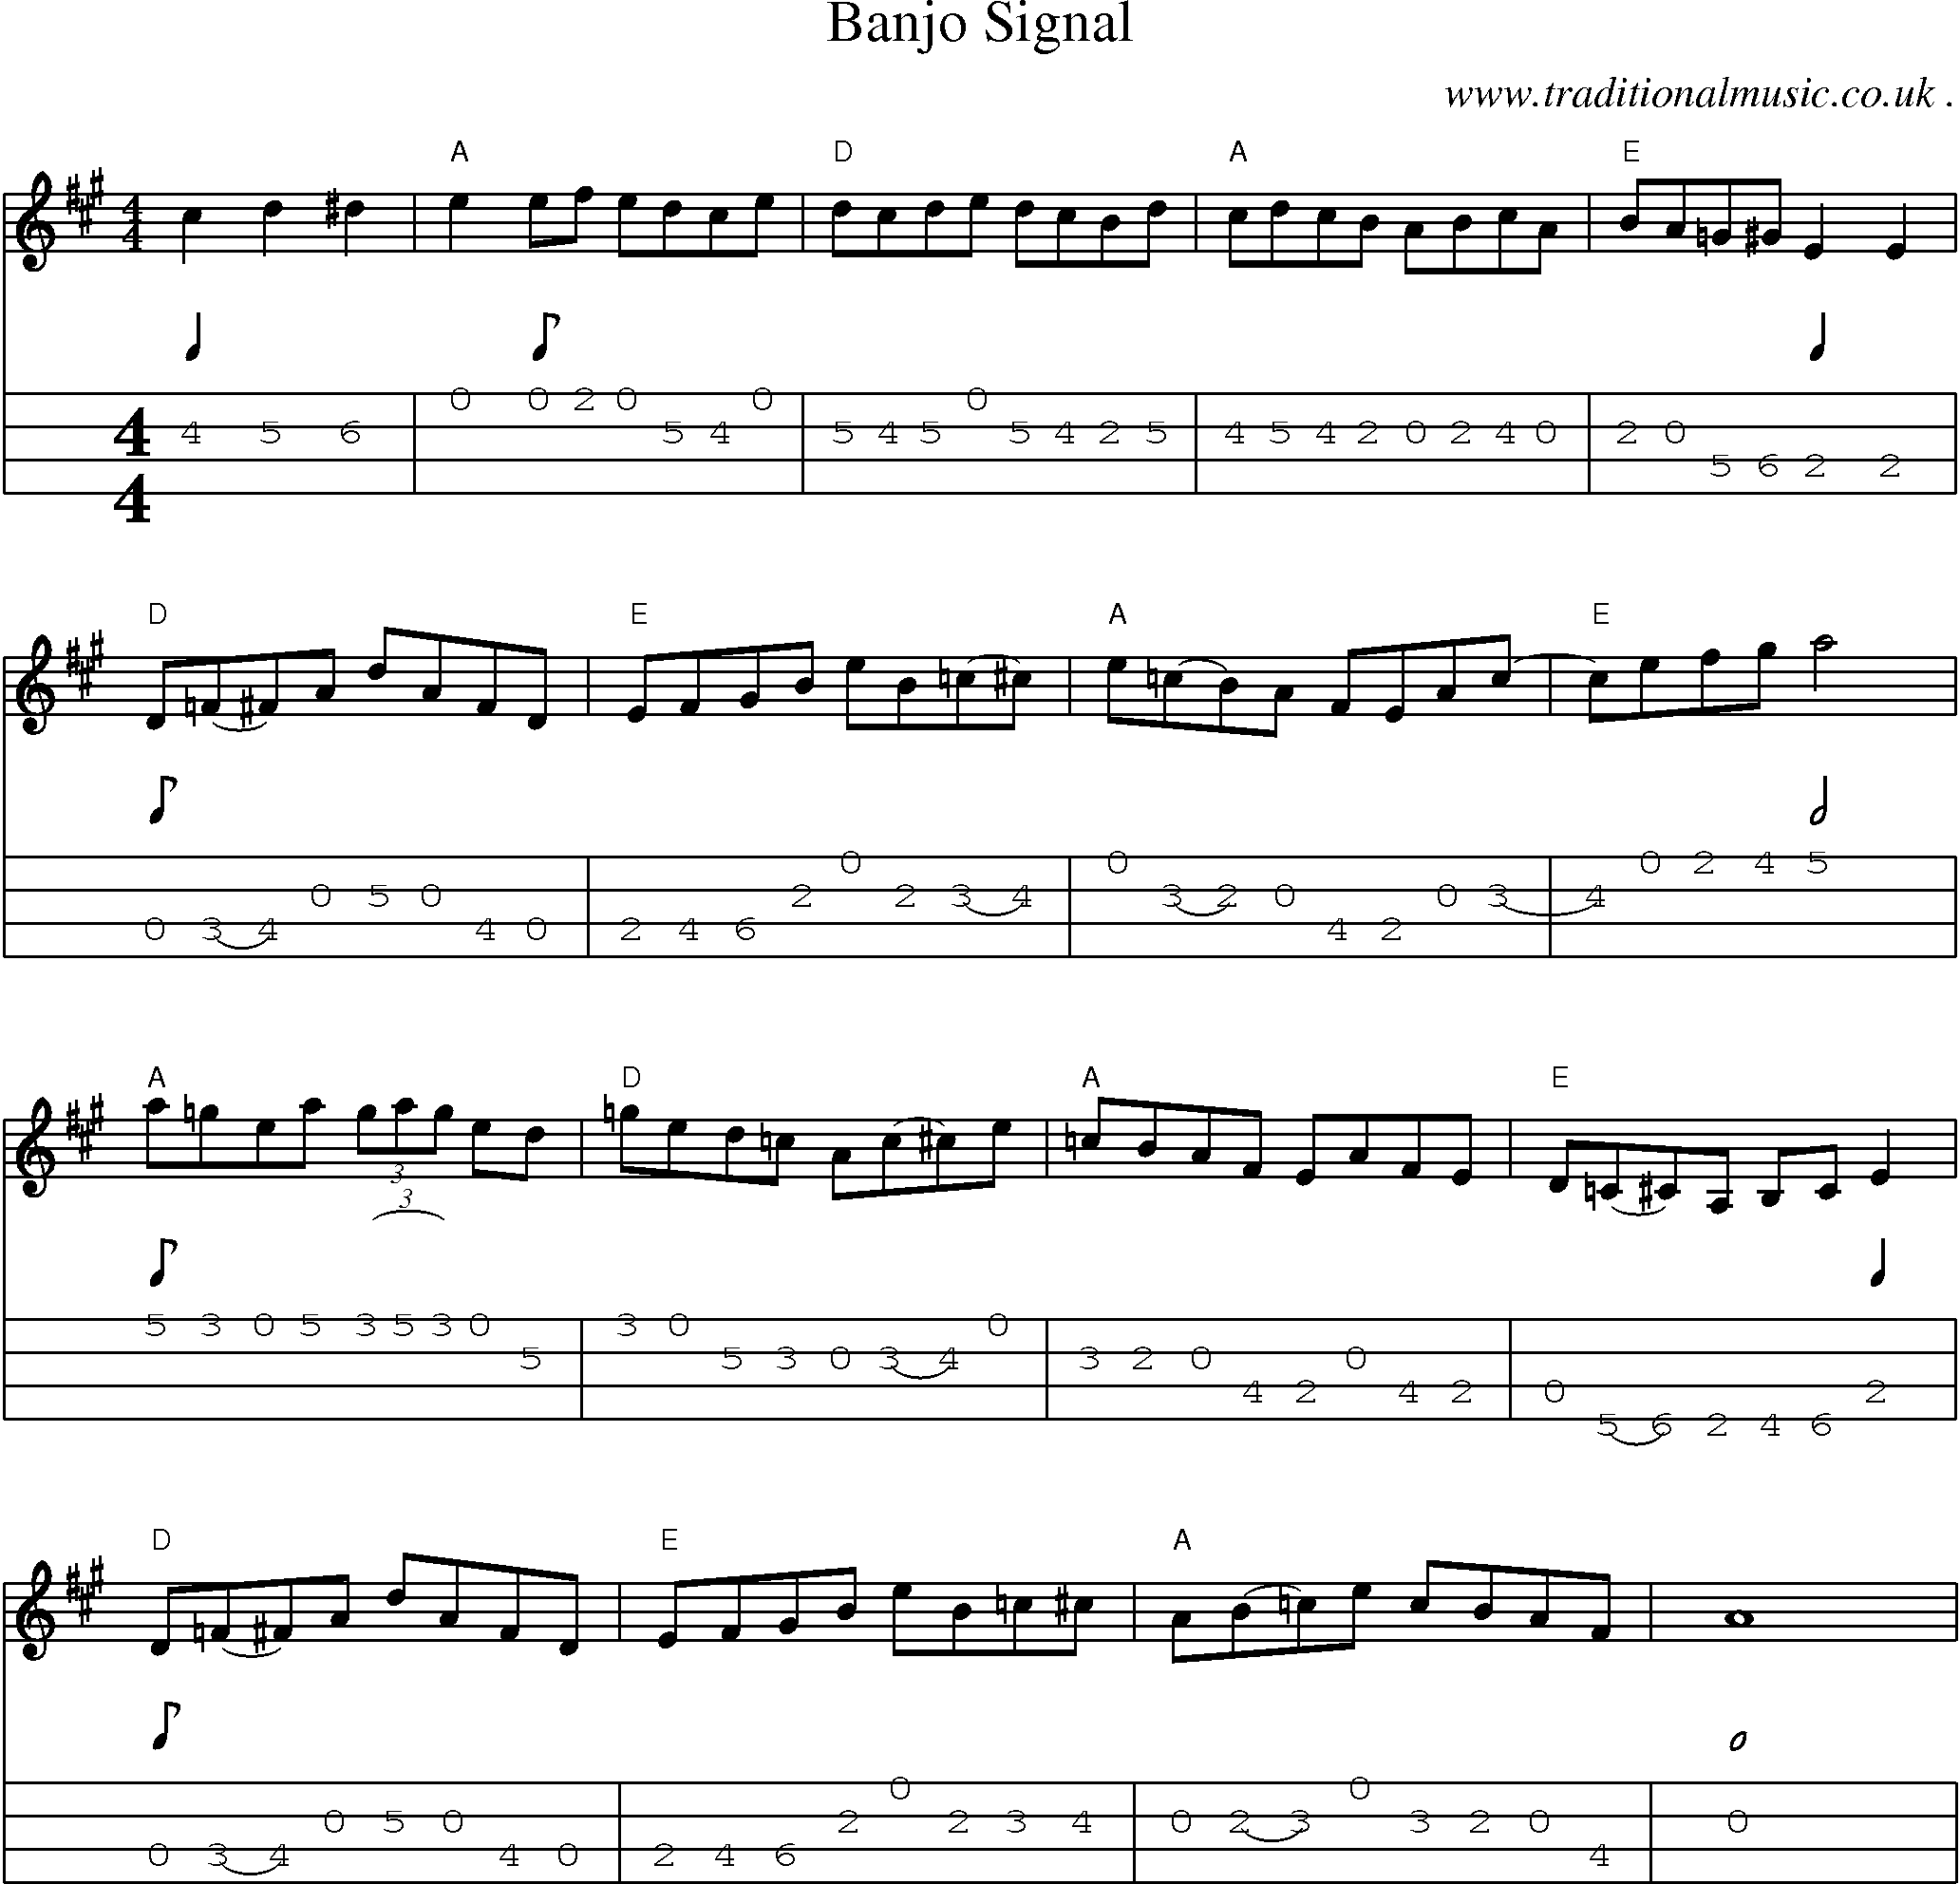 Music Score and Guitar Tabs for Banjo Signal